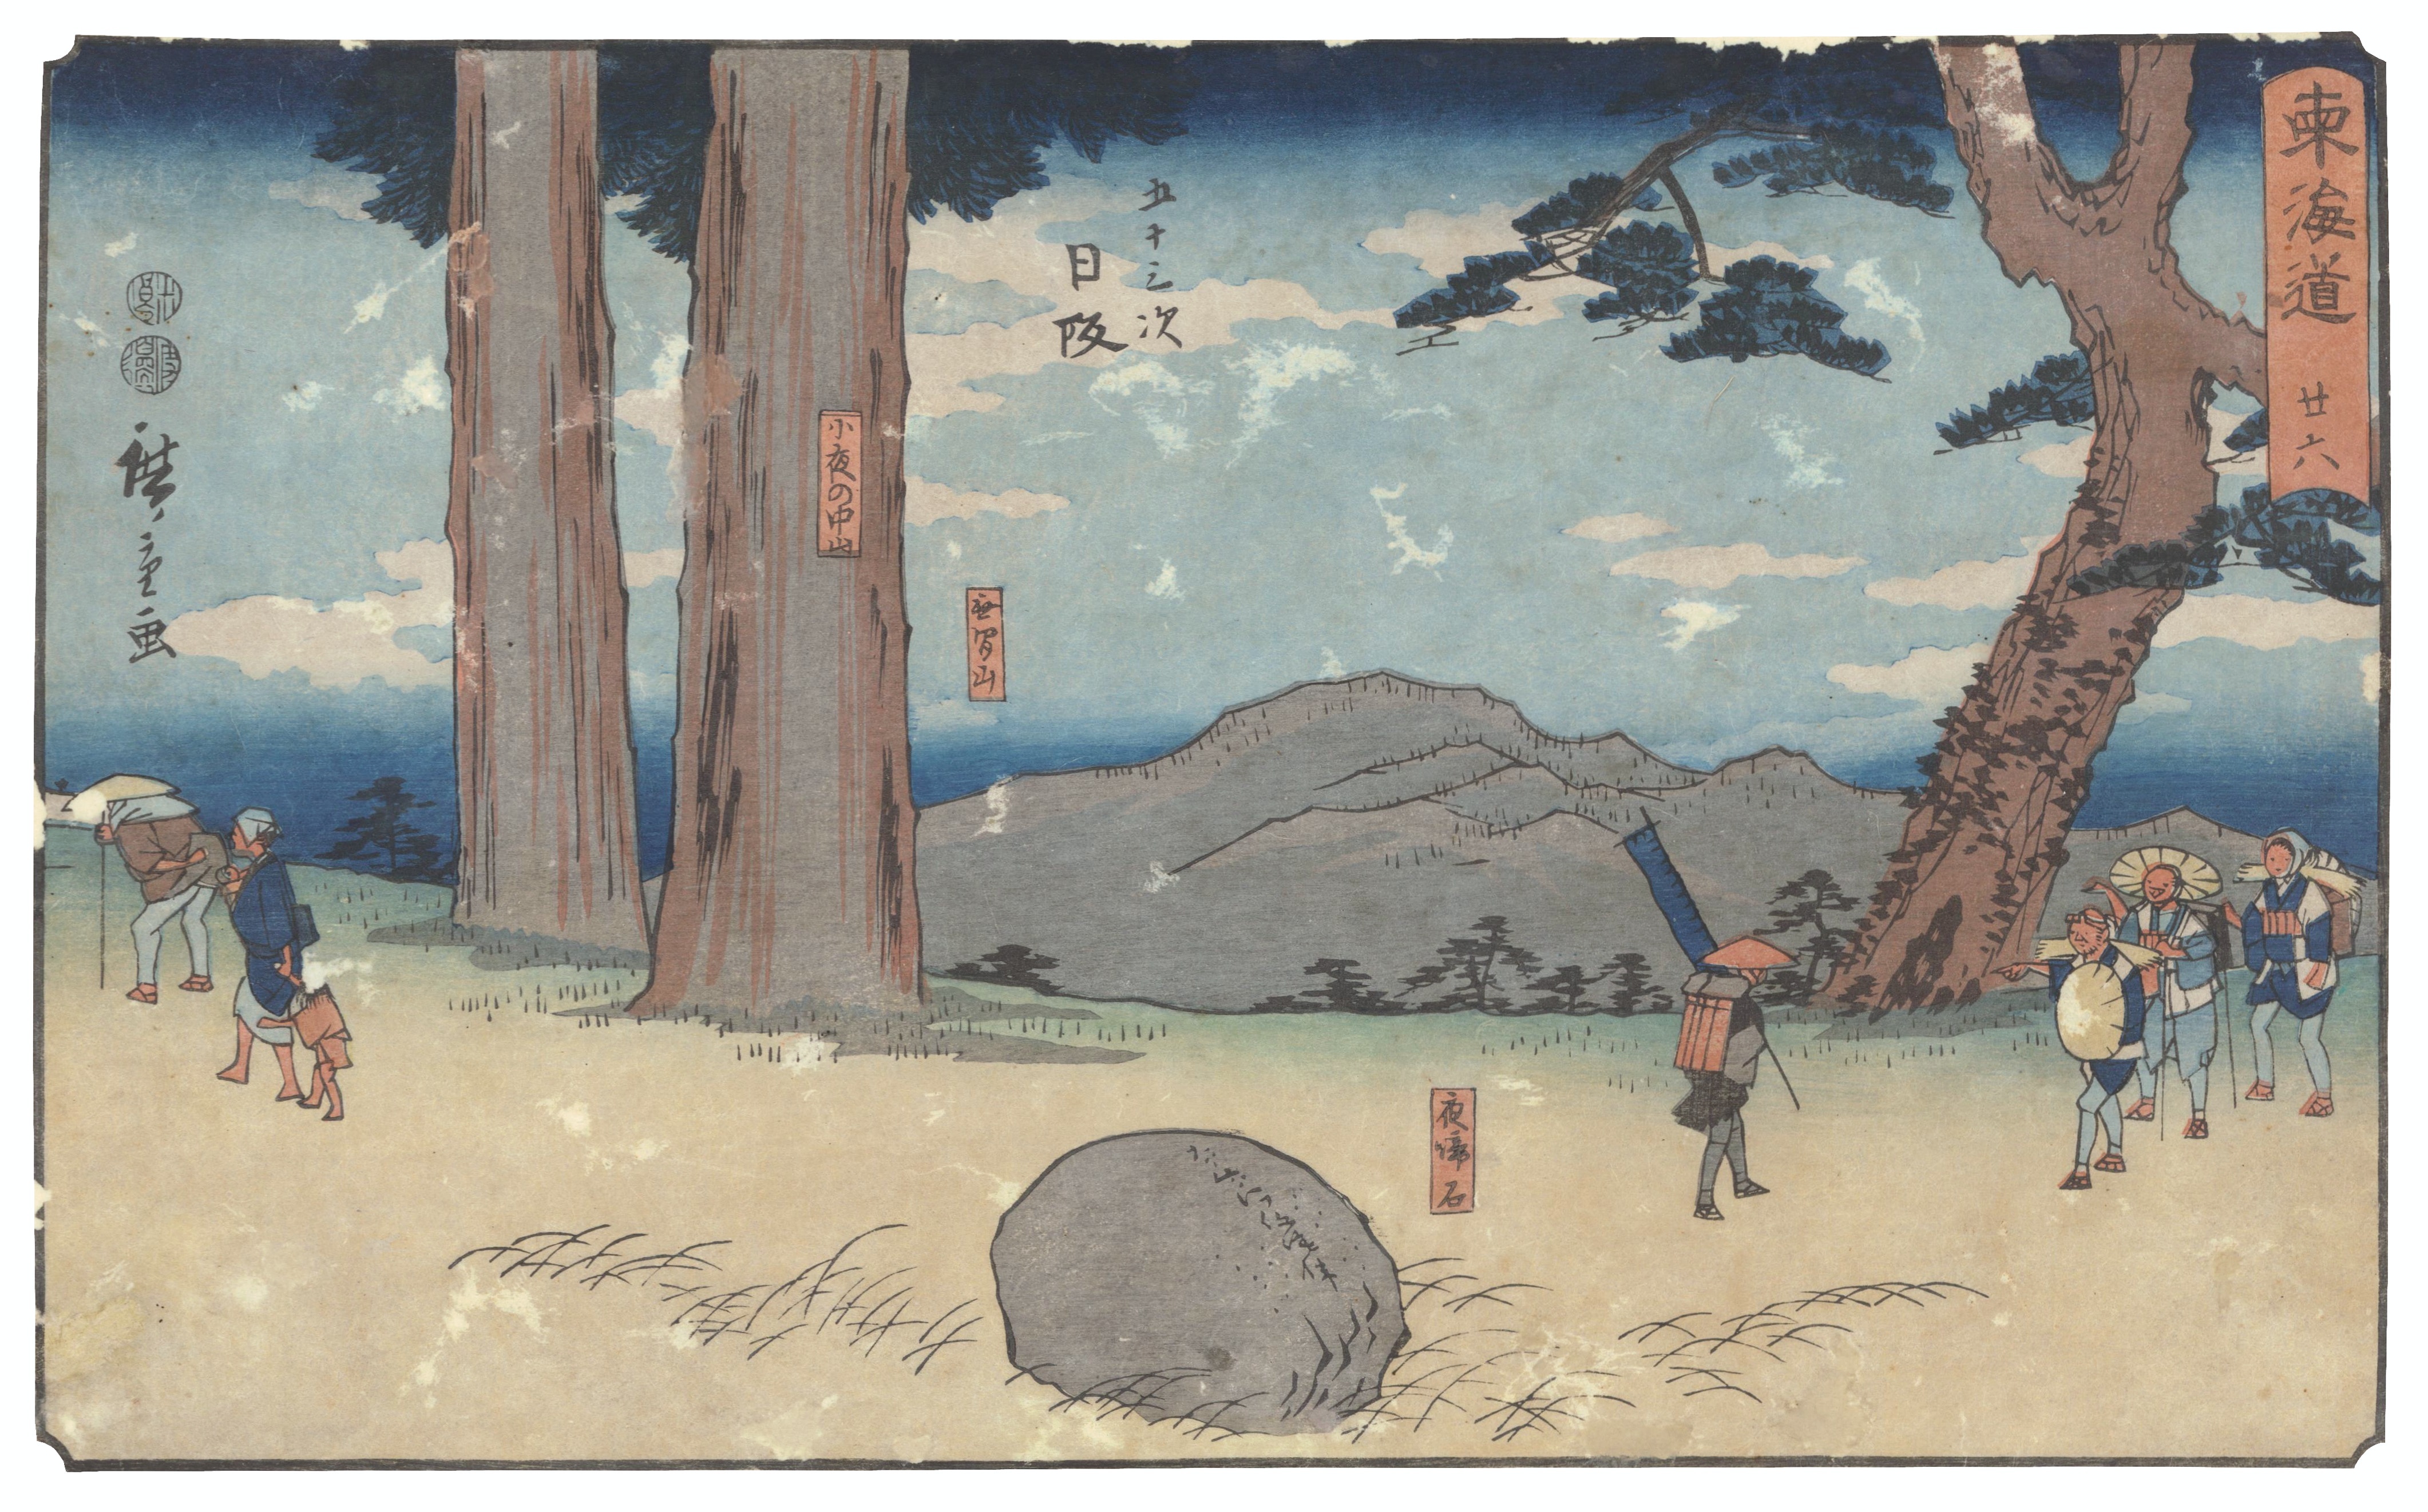 A Japanese woodblock print with trees, hills, ocean and people walking